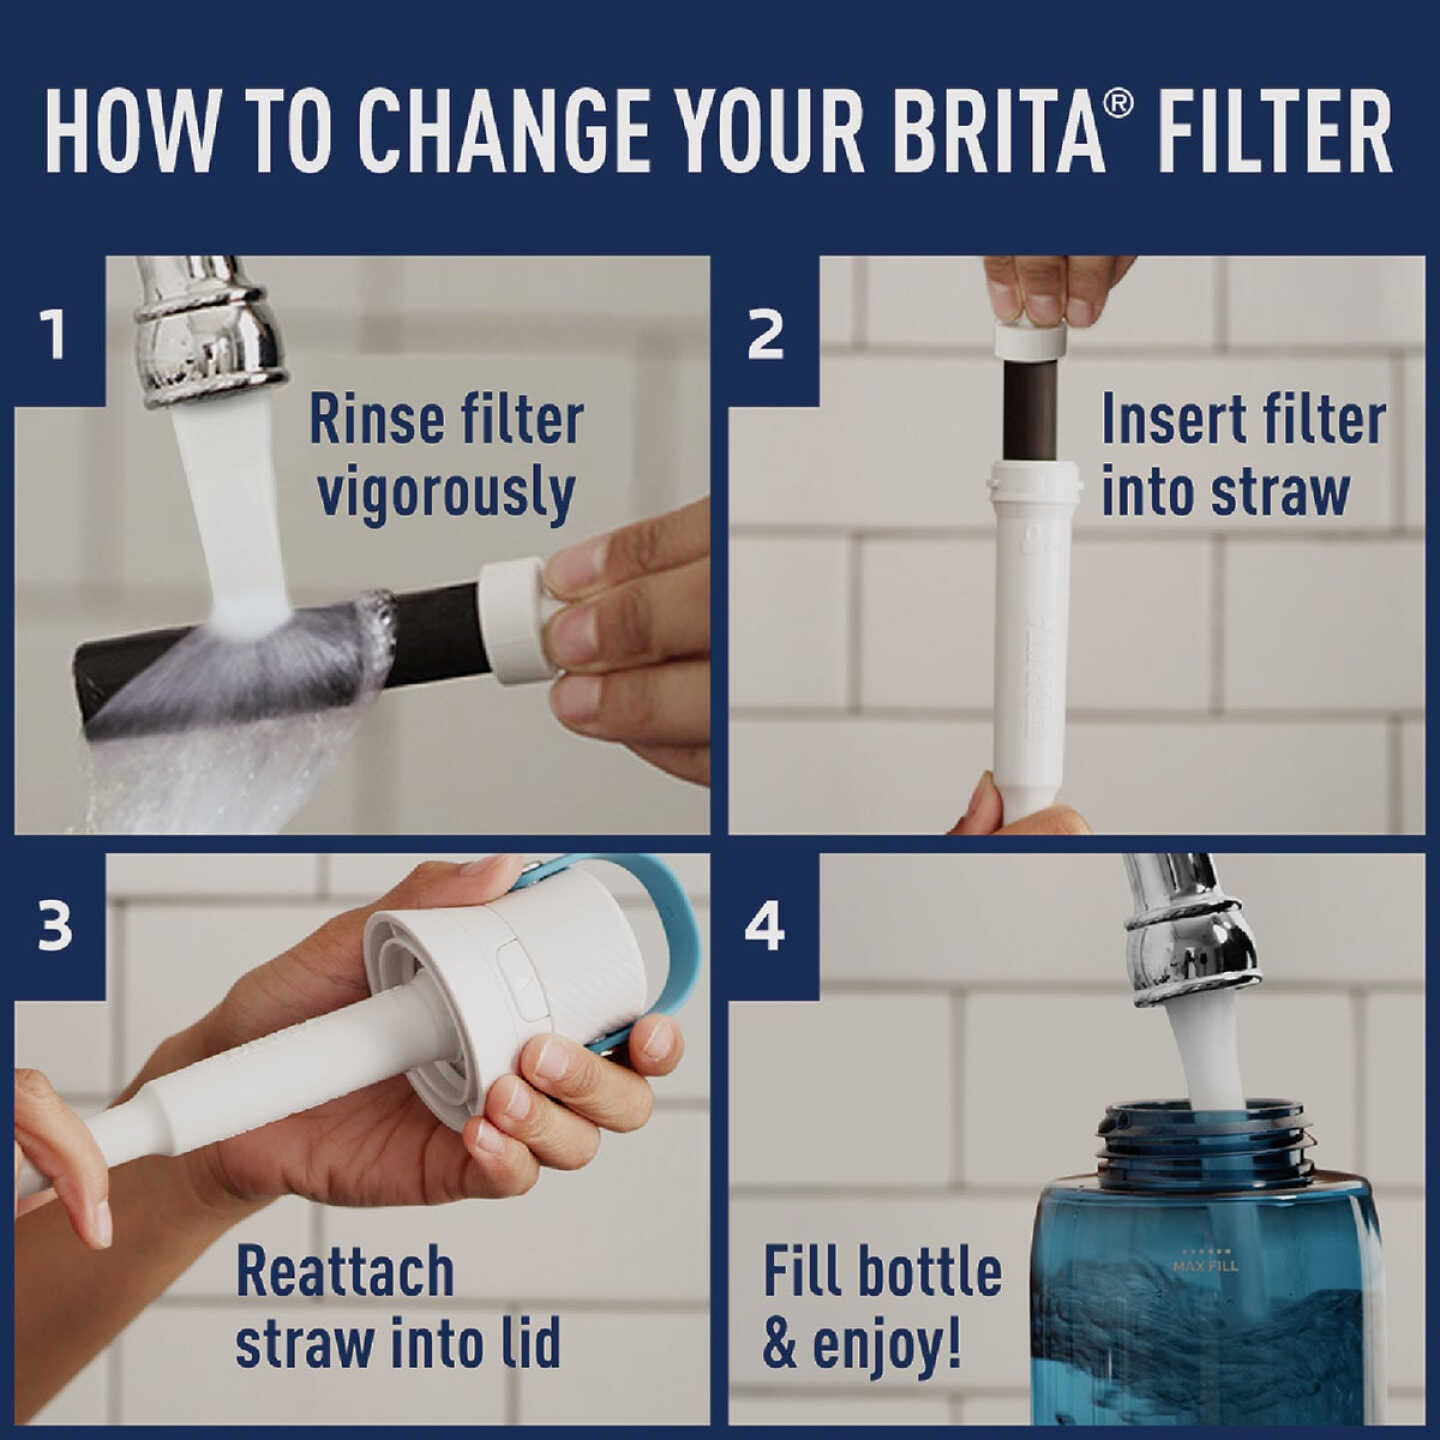 Brita Hard Sided Water Bottle Replacement Filter (3-Pack) - Gillman Home  Center